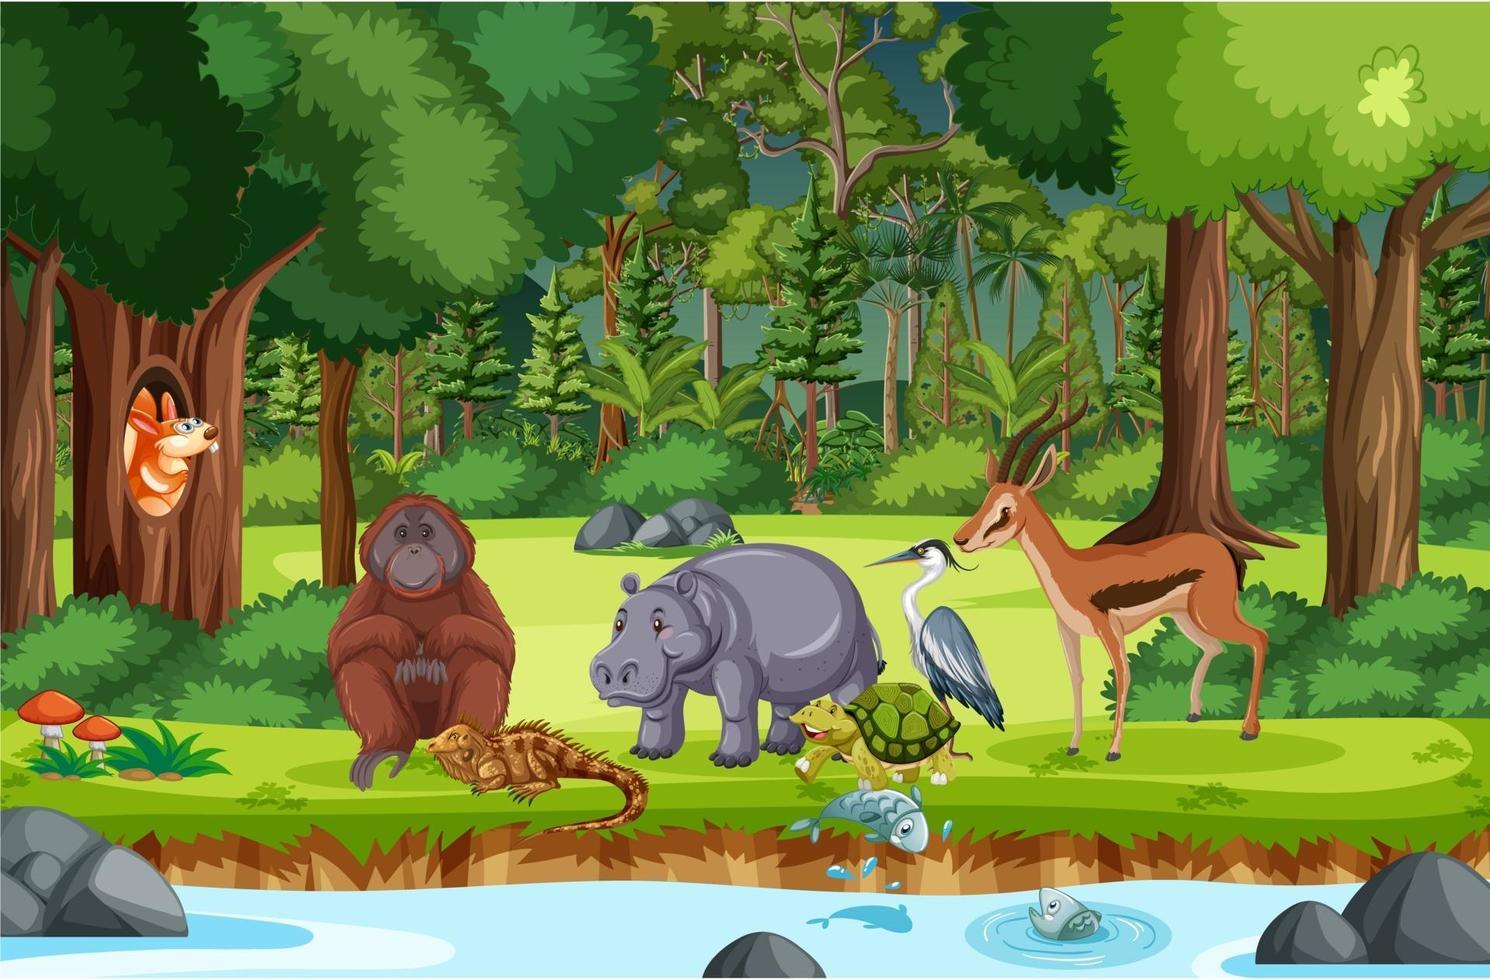 Wild animals with stream flowing through the forest scene vector